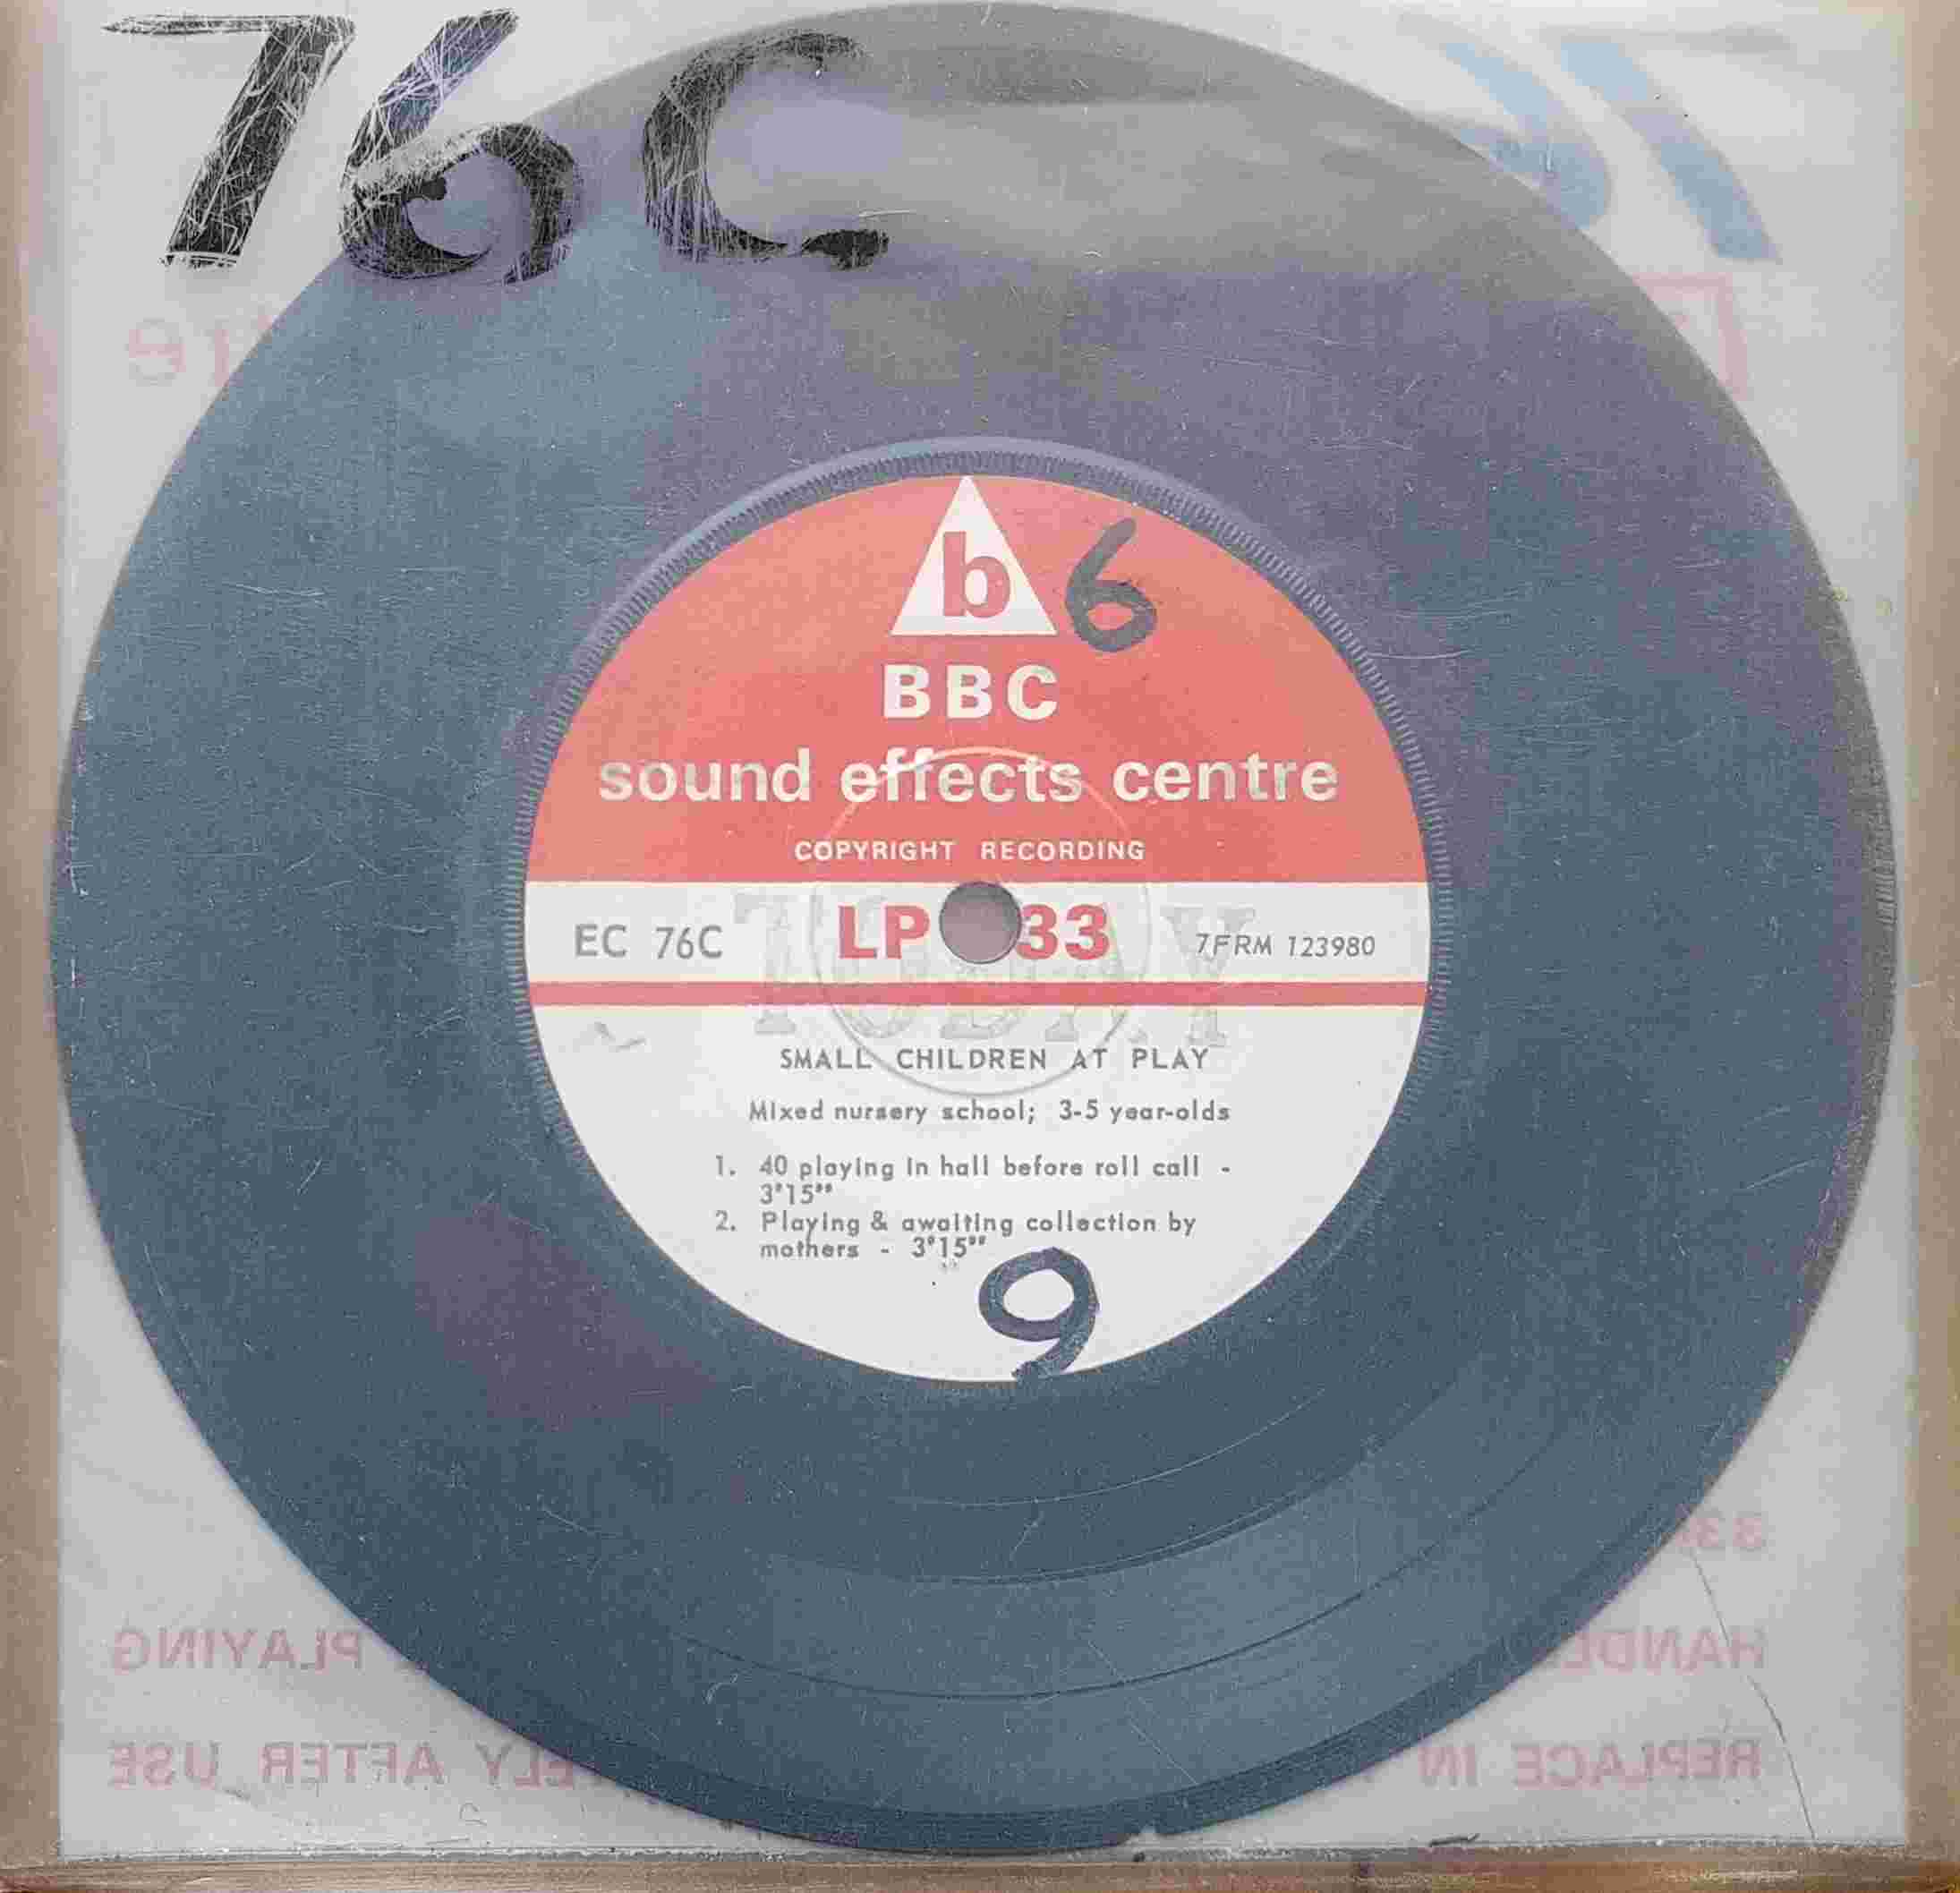 Picture of EC 76C Small children at play by artist Not registered from the BBC records and Tapes library